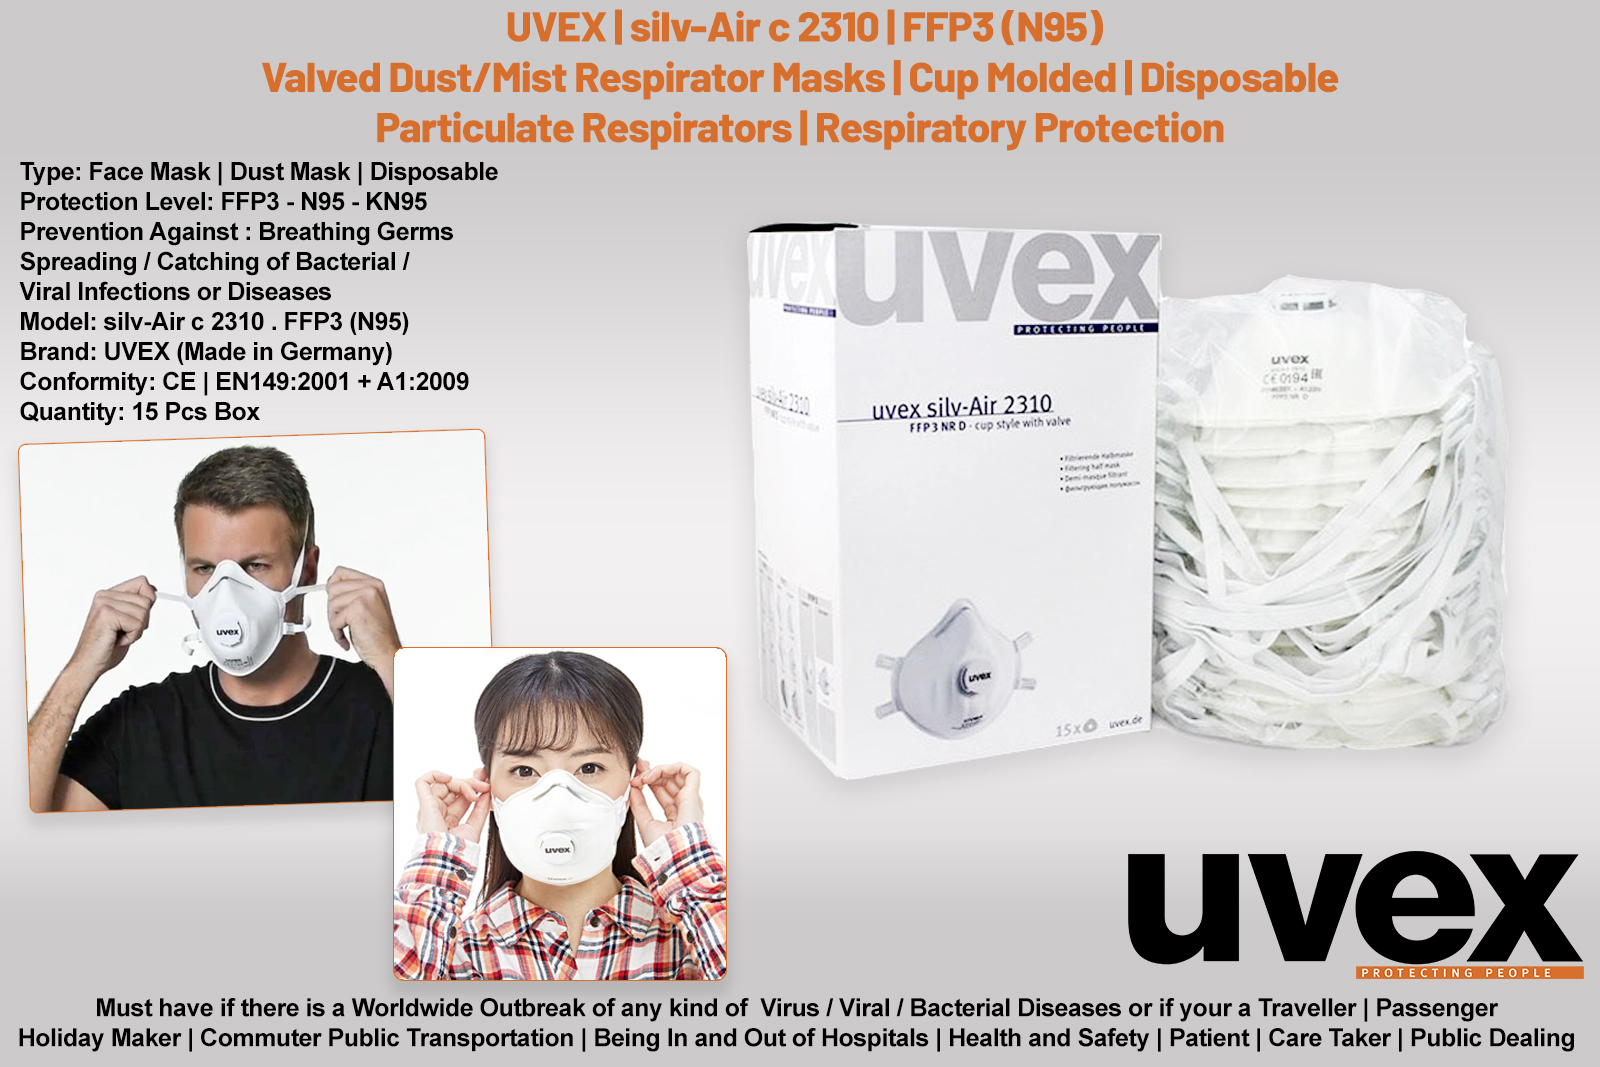 CORONA VIRUS COVID-19 Outbreak | Uvex Mask silv-Air c 2310 N99 > N95 FFP3 | GERMS Filter Dust Face Mask | Particulate Respirator | Qty 15 Pcs Box 